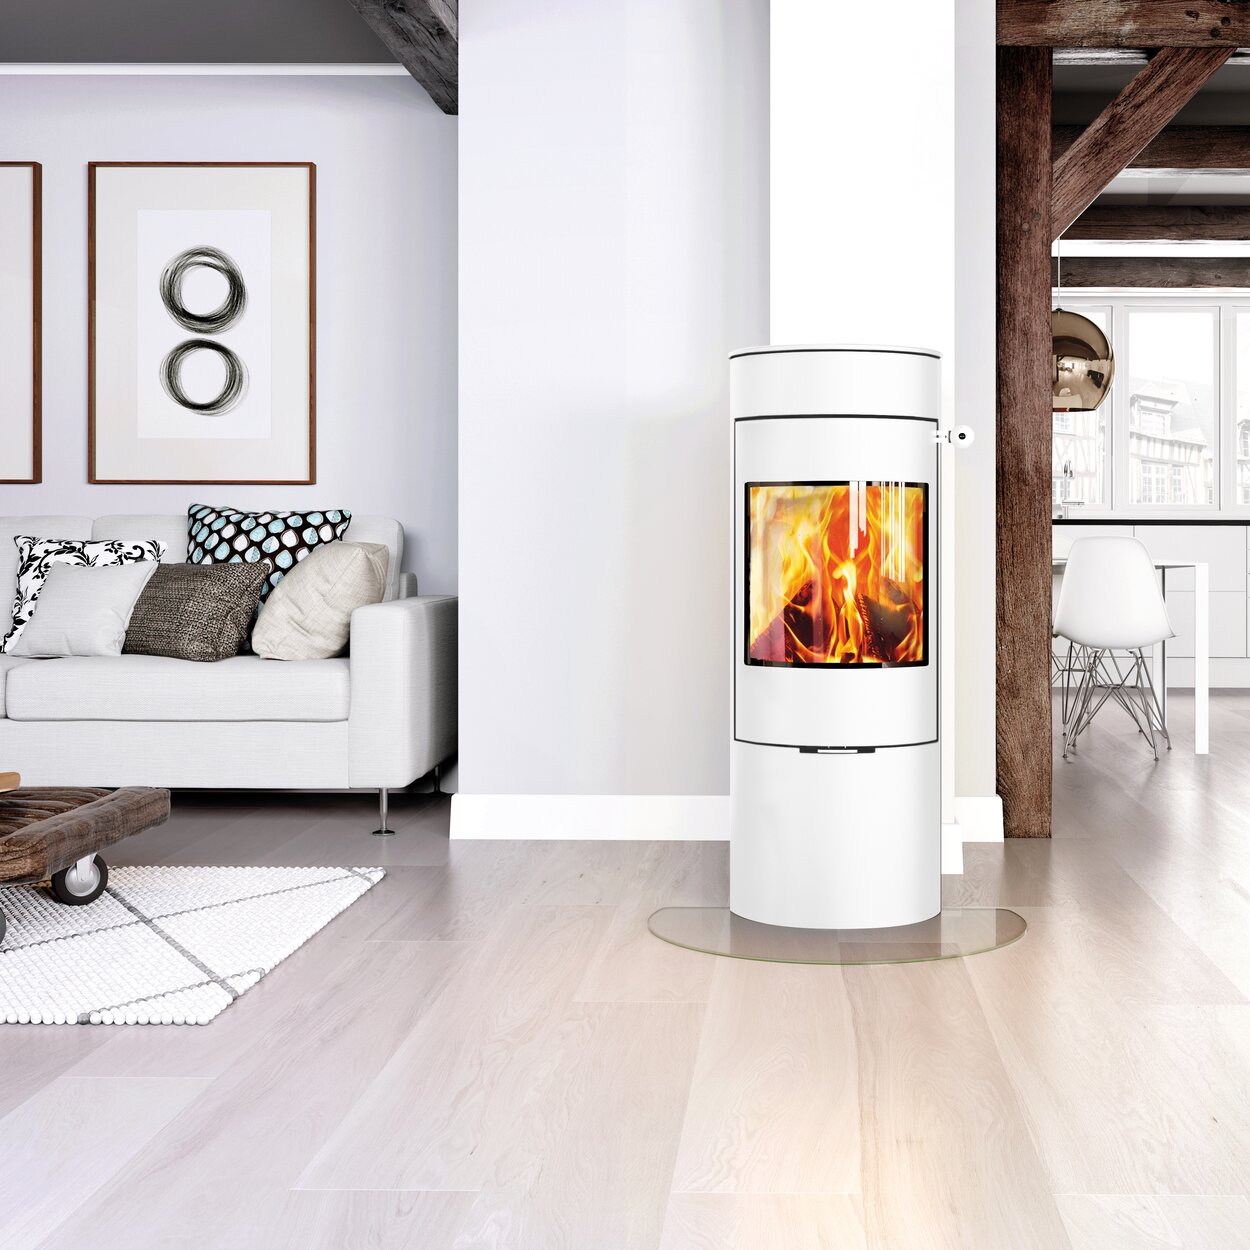 Wood stove VIVA 120 L in white with steel door in a bright, open living space